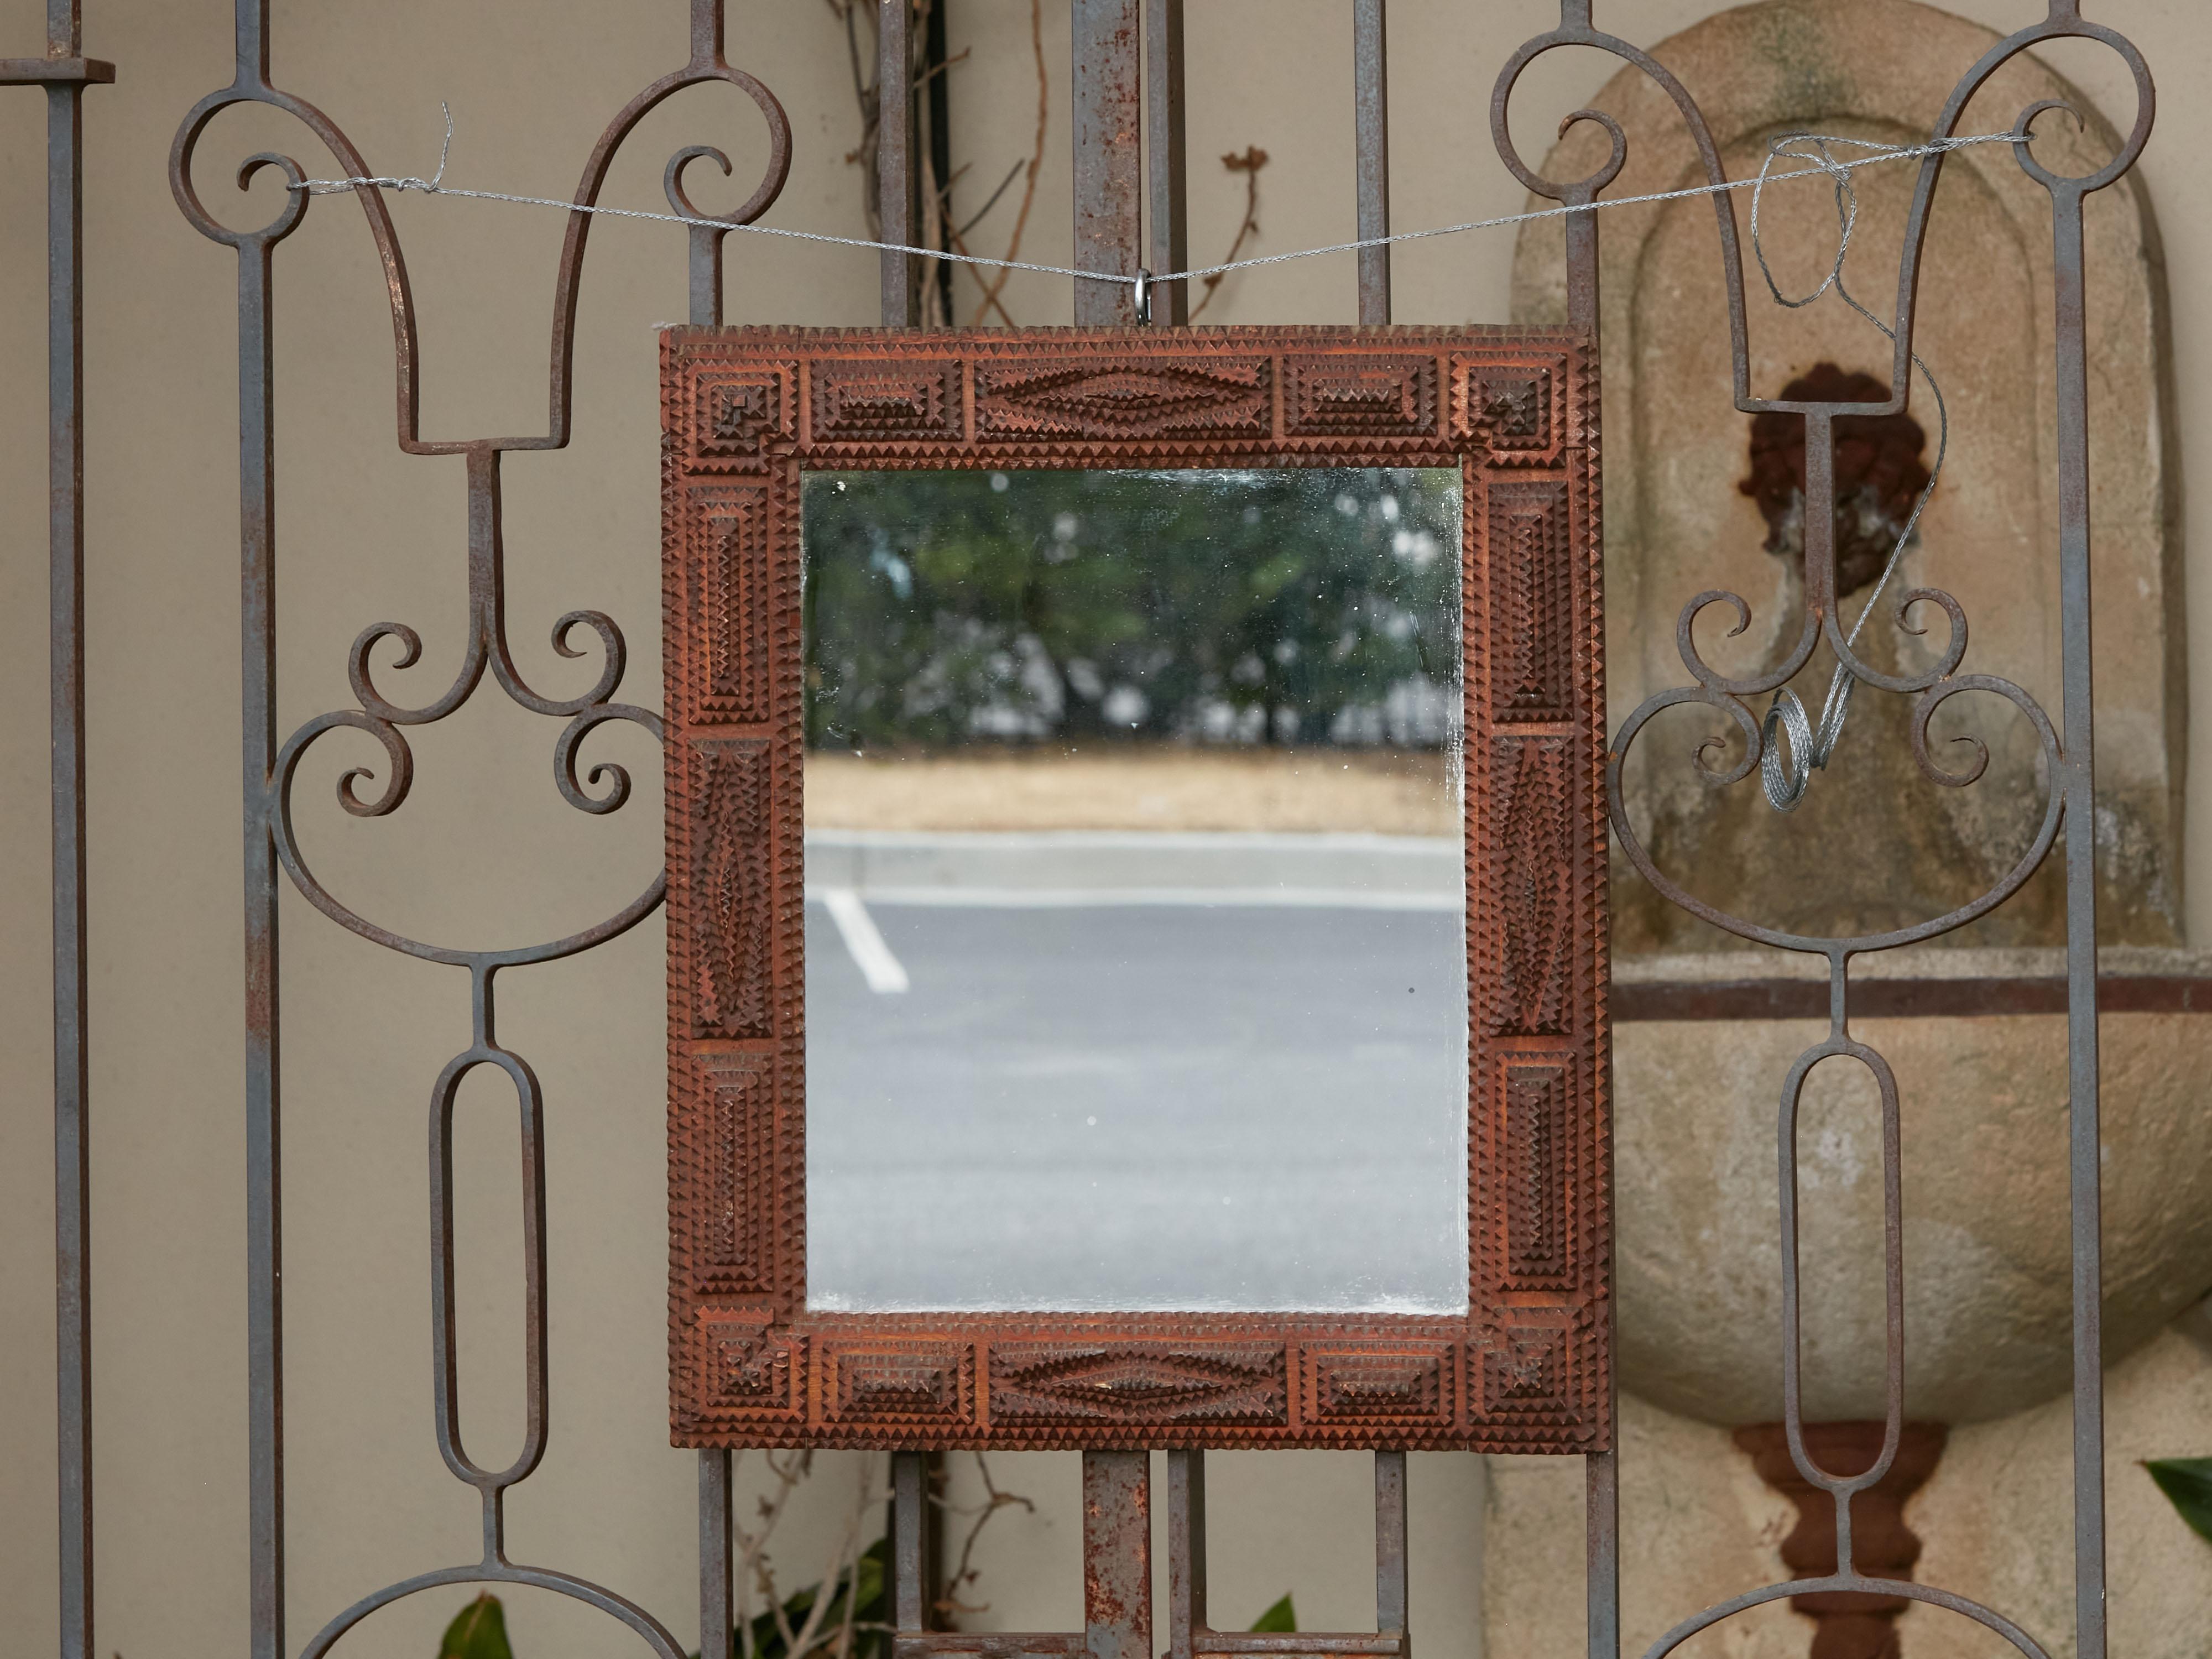 A French hand carved Tramp Art folk wall mirror from the early 20th century, with raised motifs. Created in France during the Turn of the Century period which saw the transition between the 19th to the 20th, this charming wooden mirror presents the